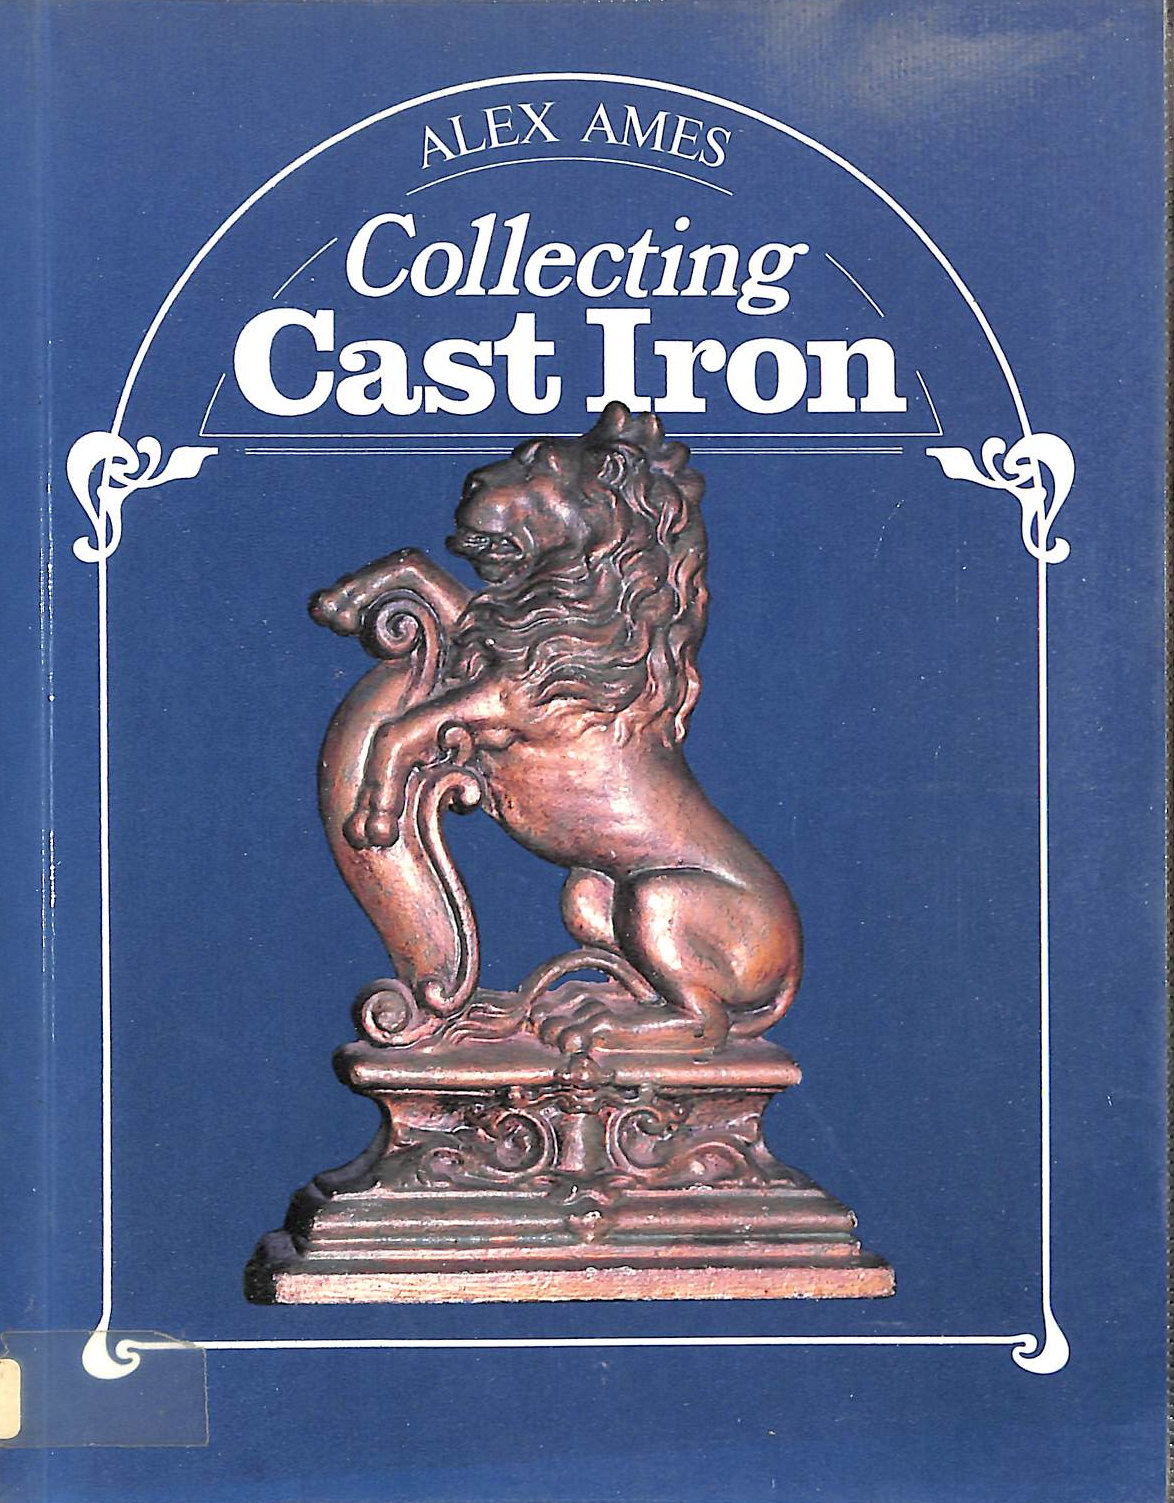 AMES, ALEX - Collecting Cast Iron